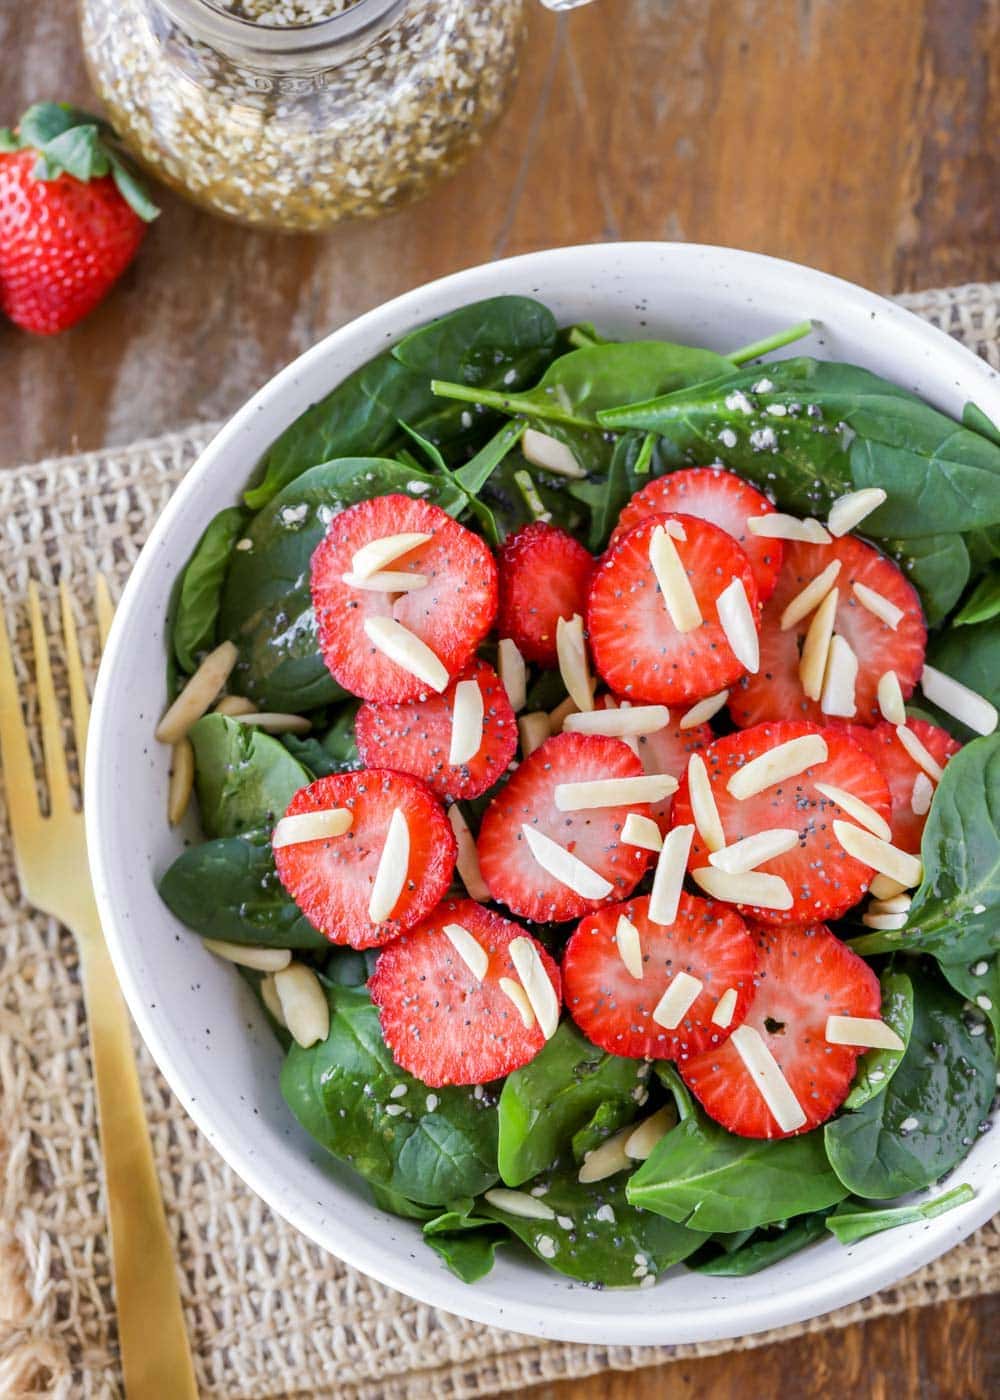 Strawberry spinach salad topped with nuts in a white bowl.